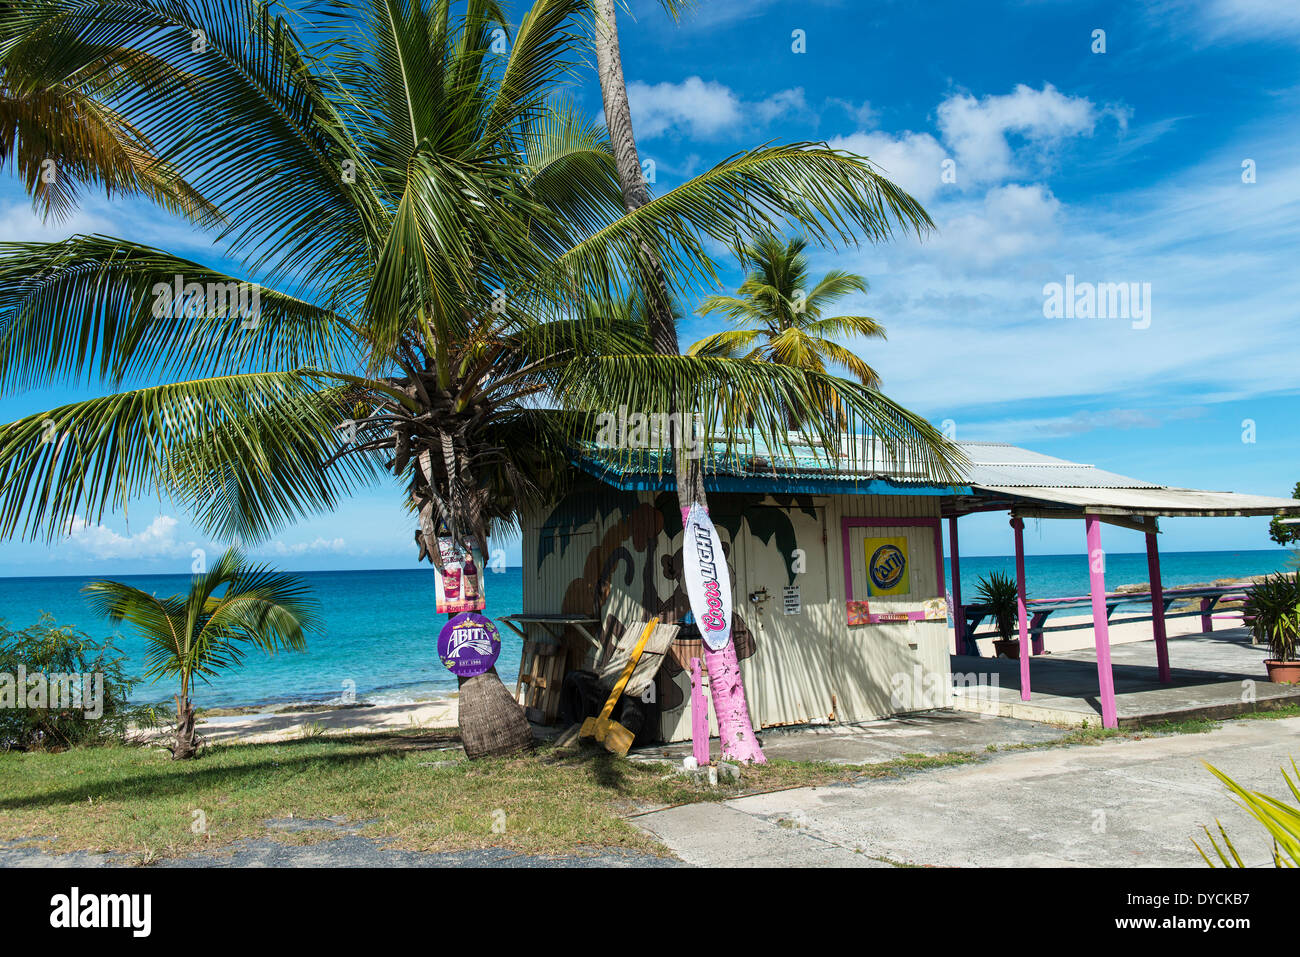 A closed drink stand on the beach, west end, of St. Croix, U. S. Virgin Islands. Caribbean sea in the background. Stock Photo